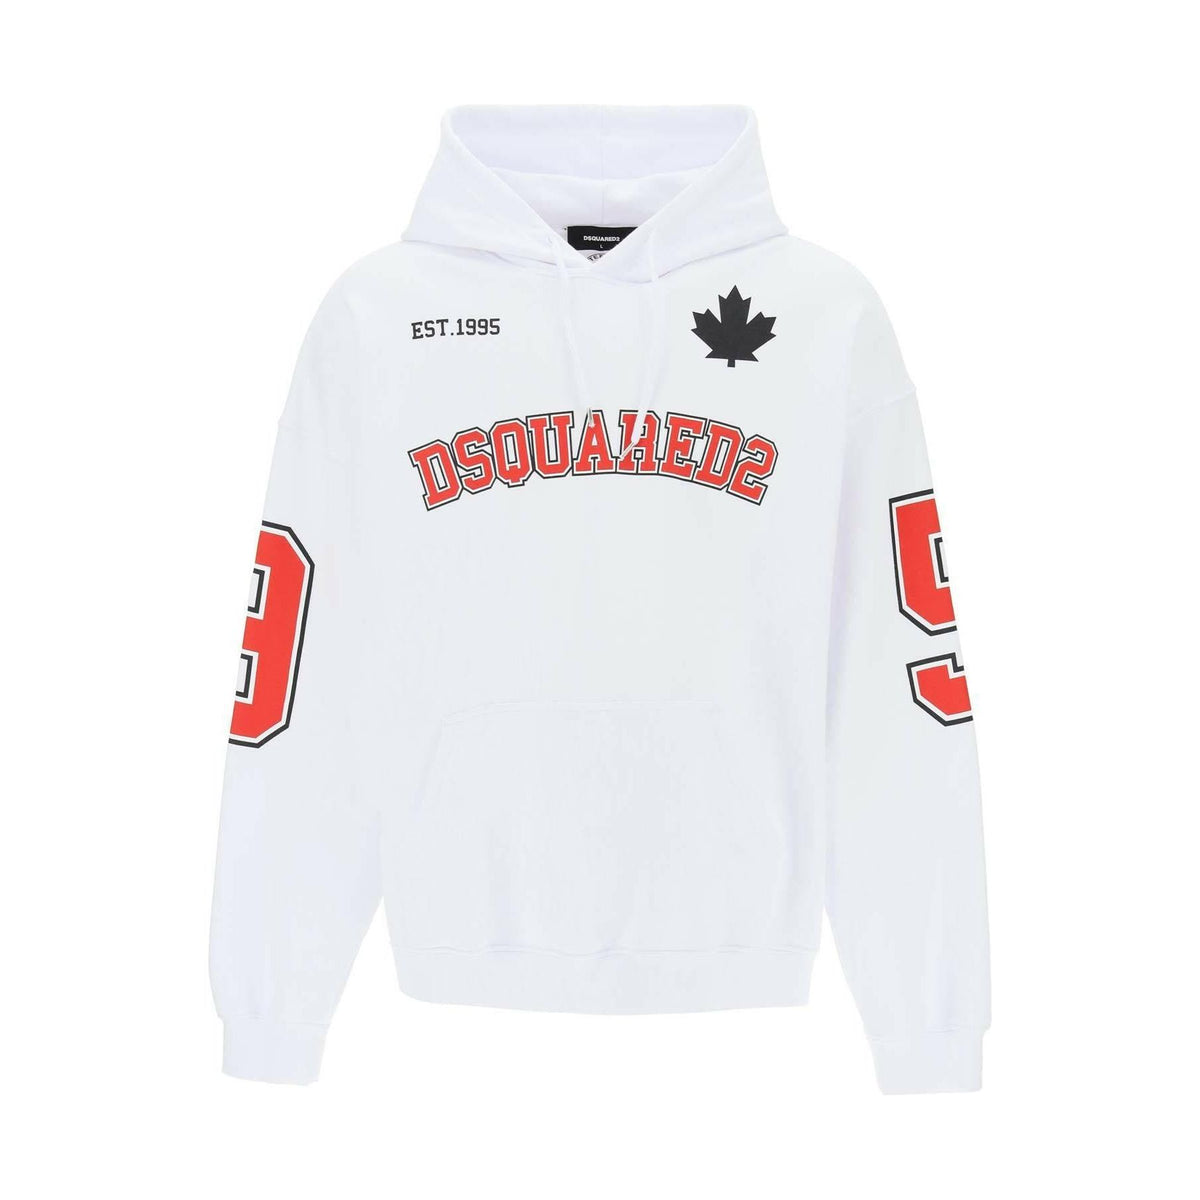 DSQUARED2 - White Hooded Caten 64 Cotton Sweatshirt With Numerical Prints - JOHN JULIA